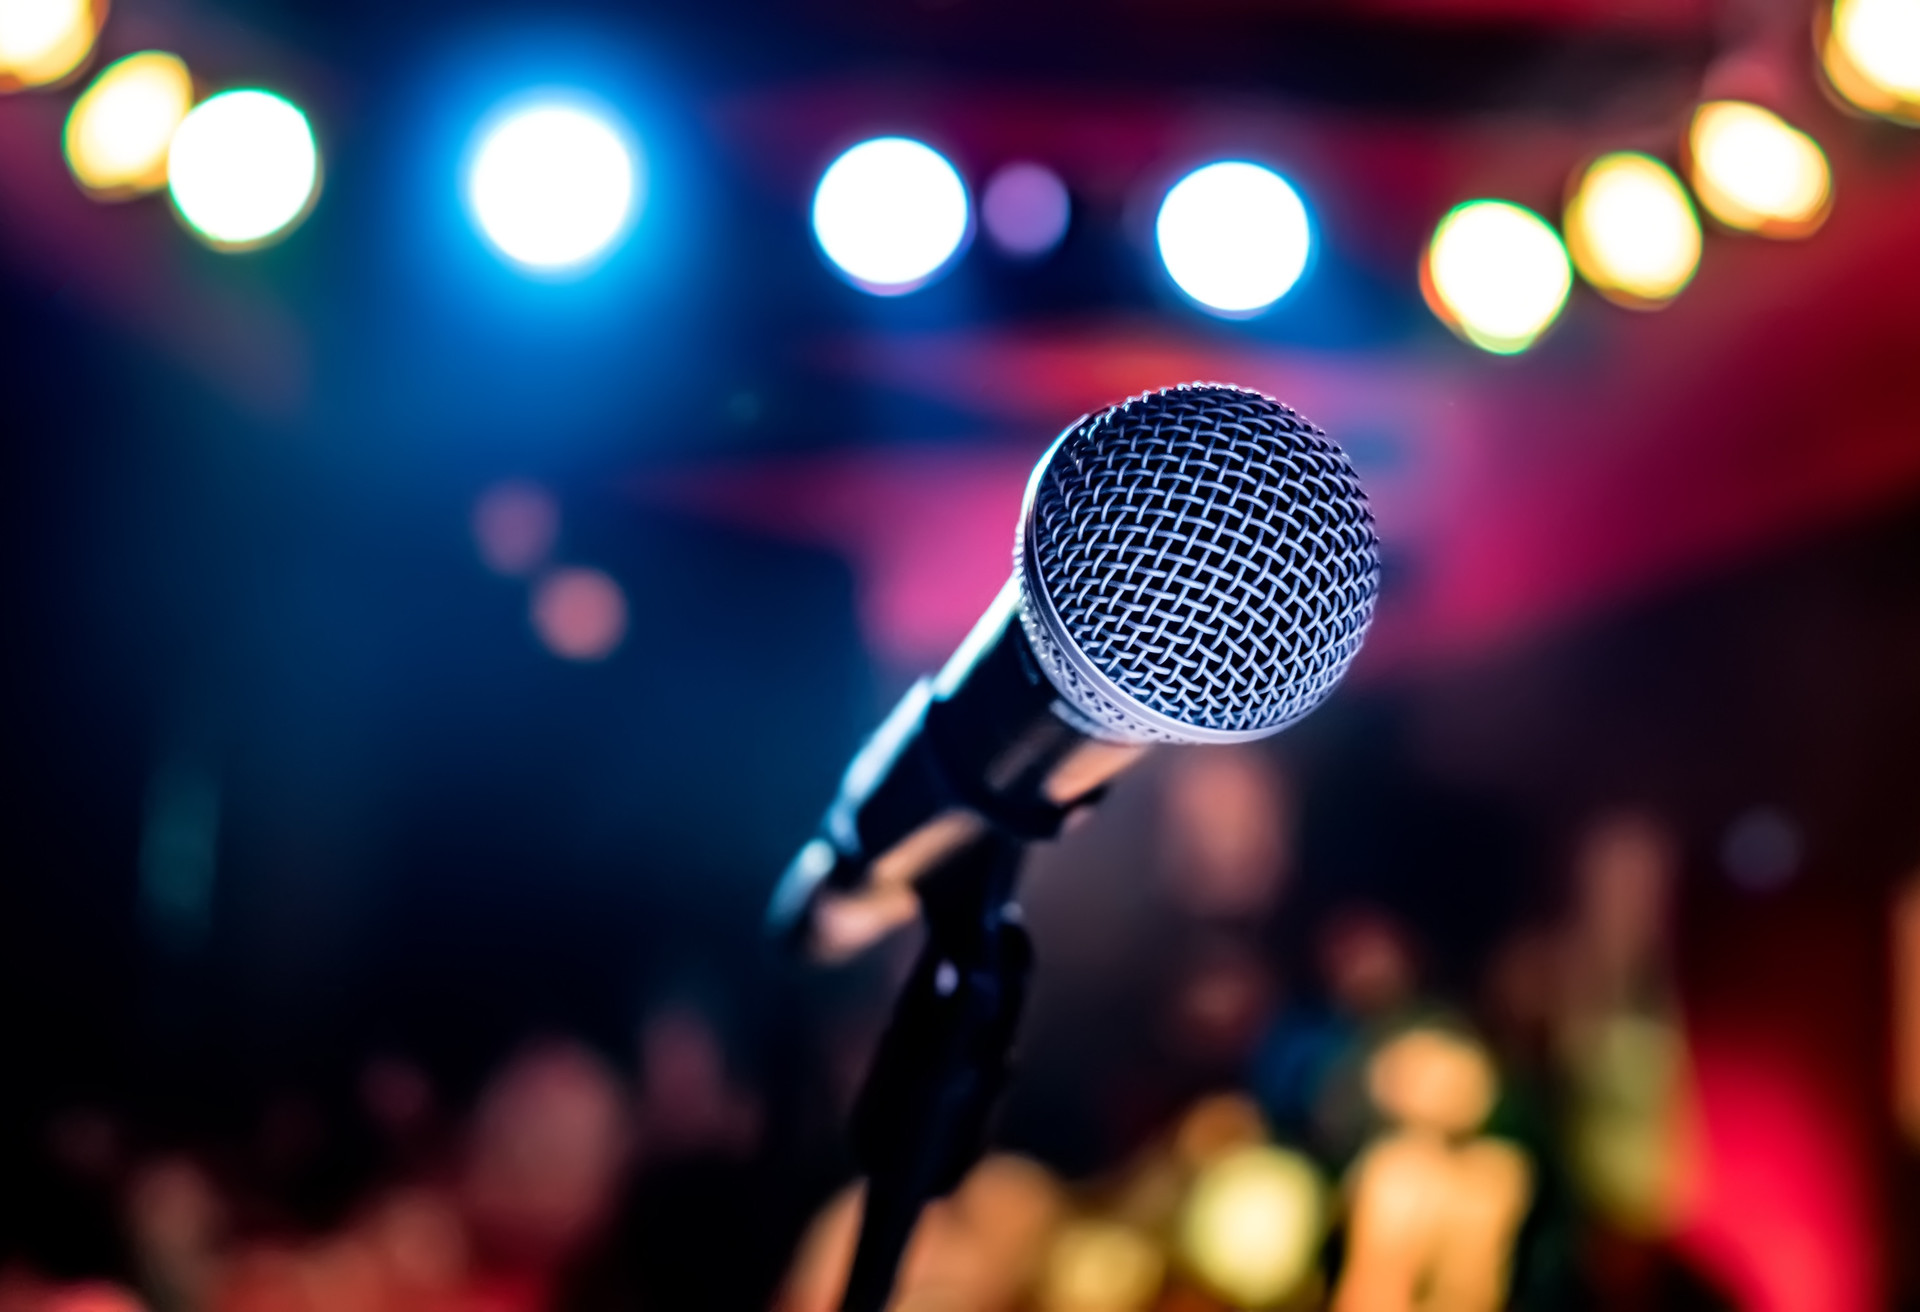 Public performance on stage Microphone on stage against a background of auditorium. Shallow depth of field. Public performance on stage.; Shutterstock ID 1017257791; Purpose: Commercial emails; Brand (KAYAK, Momondo, Any): All; Client/Licensee: Carlee Shults